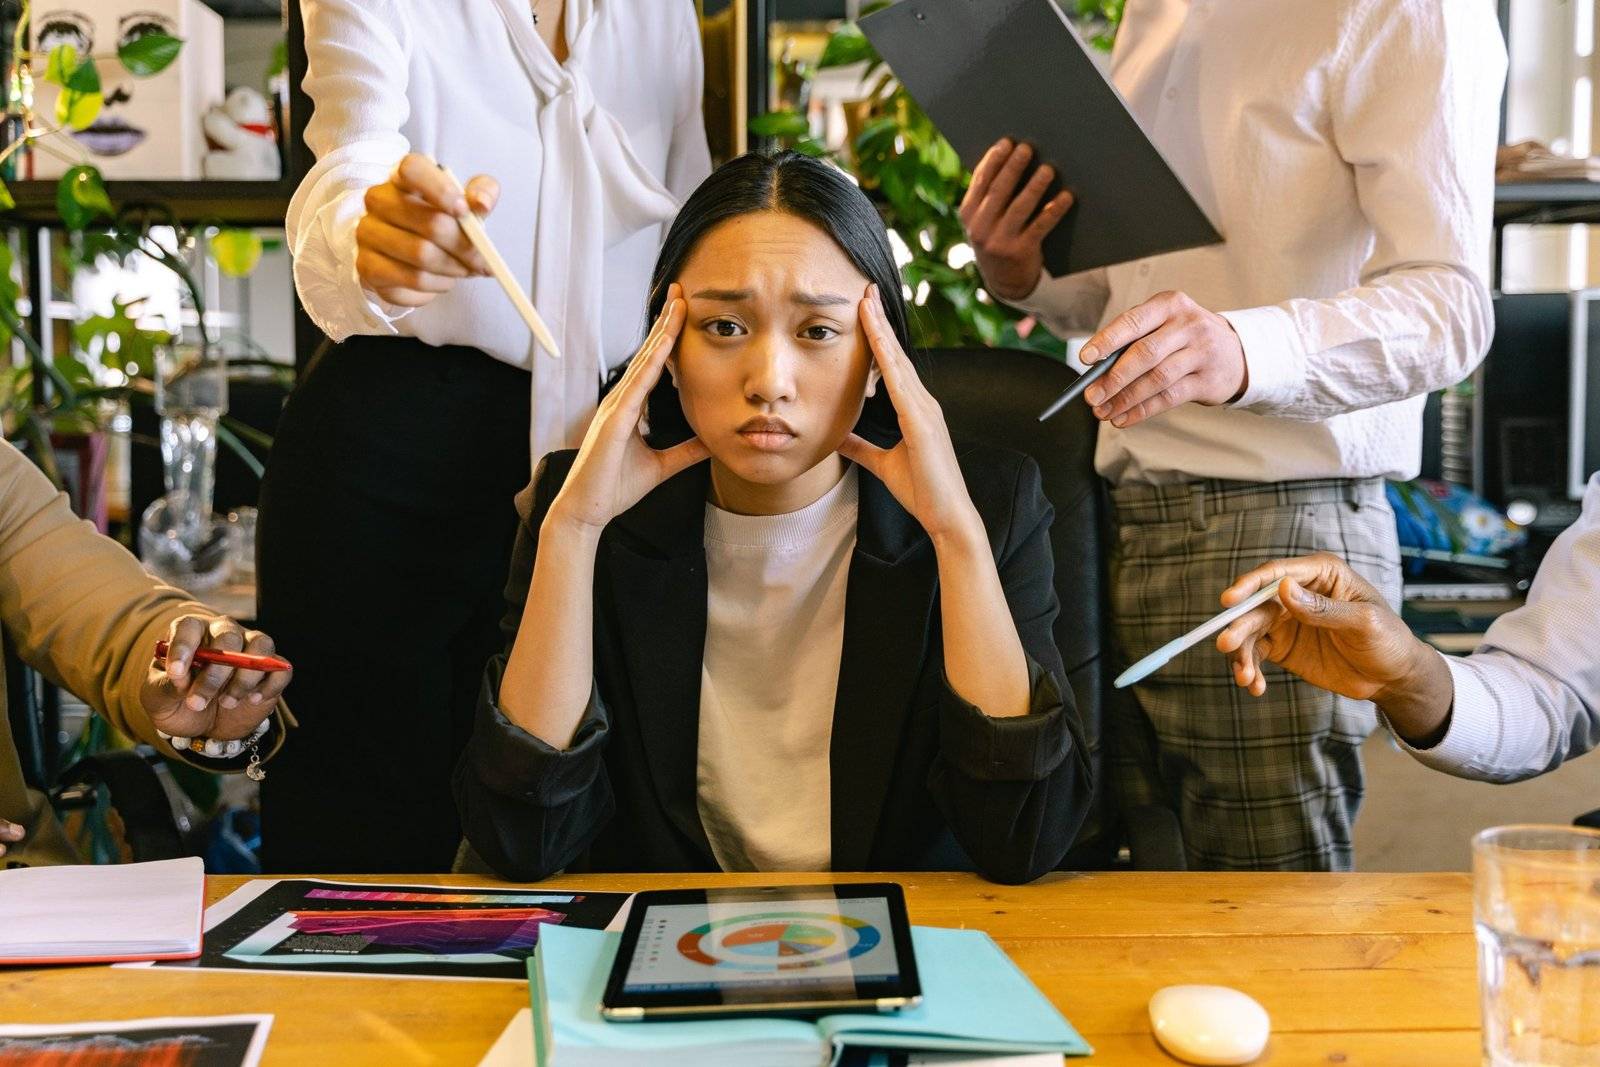 overwhelmed woman sitting at desk with people surrounding her in the workplace suffering from hustle culture syndrome